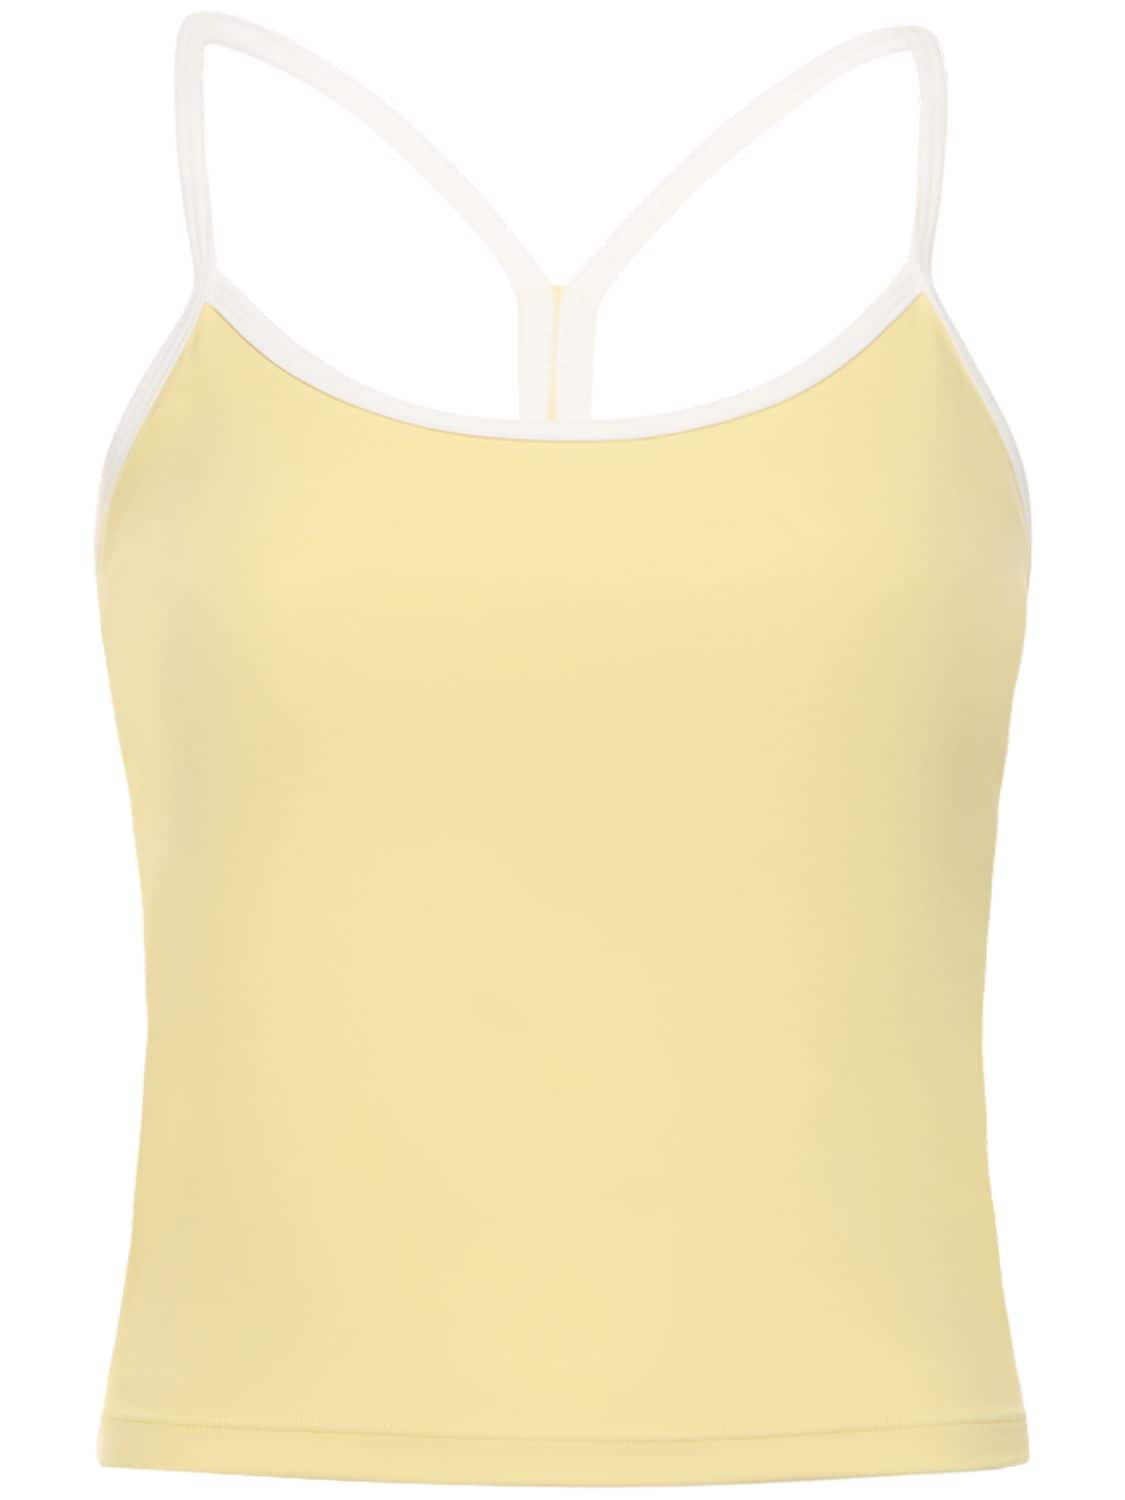 Splits59 Airweight Stretch Tech Tank Top In Yellow